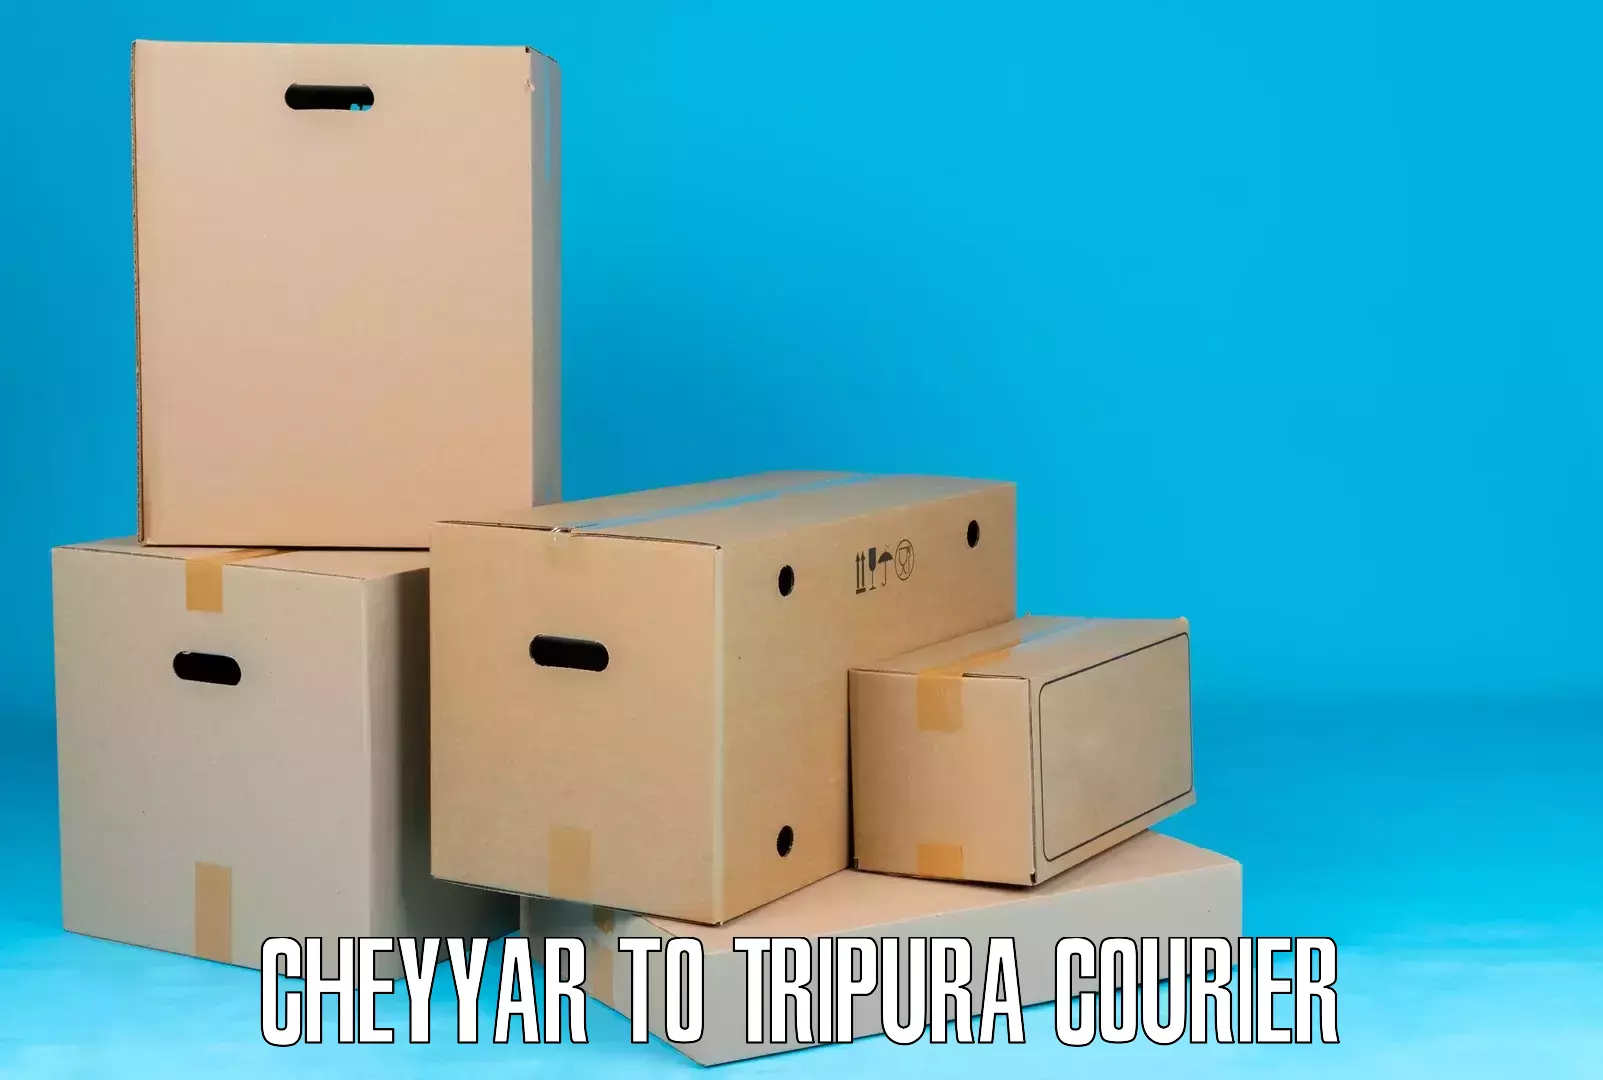 Quality courier partnerships Cheyyar to Udaipur Tripura